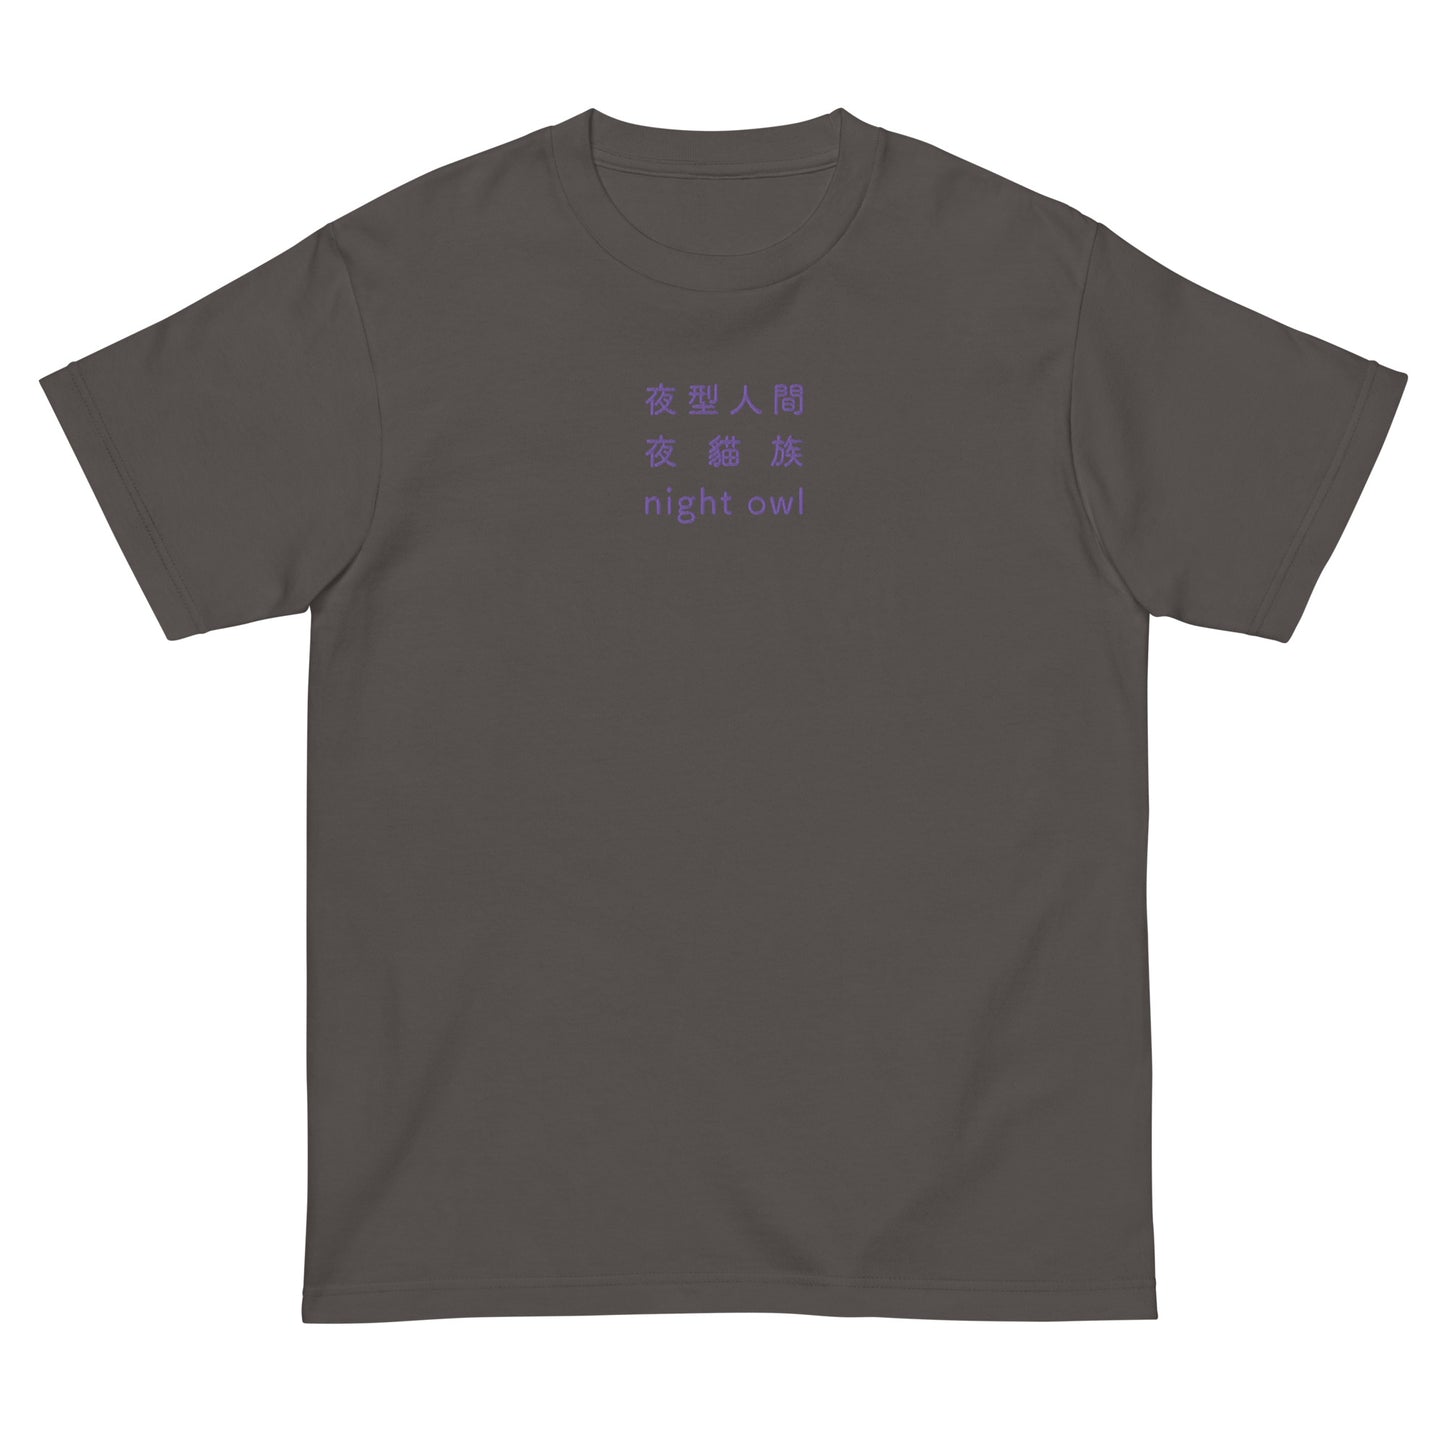 Dark Gray High Quality Tee - Front Design with an Purple Embroidery "Night Owl" in Japanese,Chinese and English